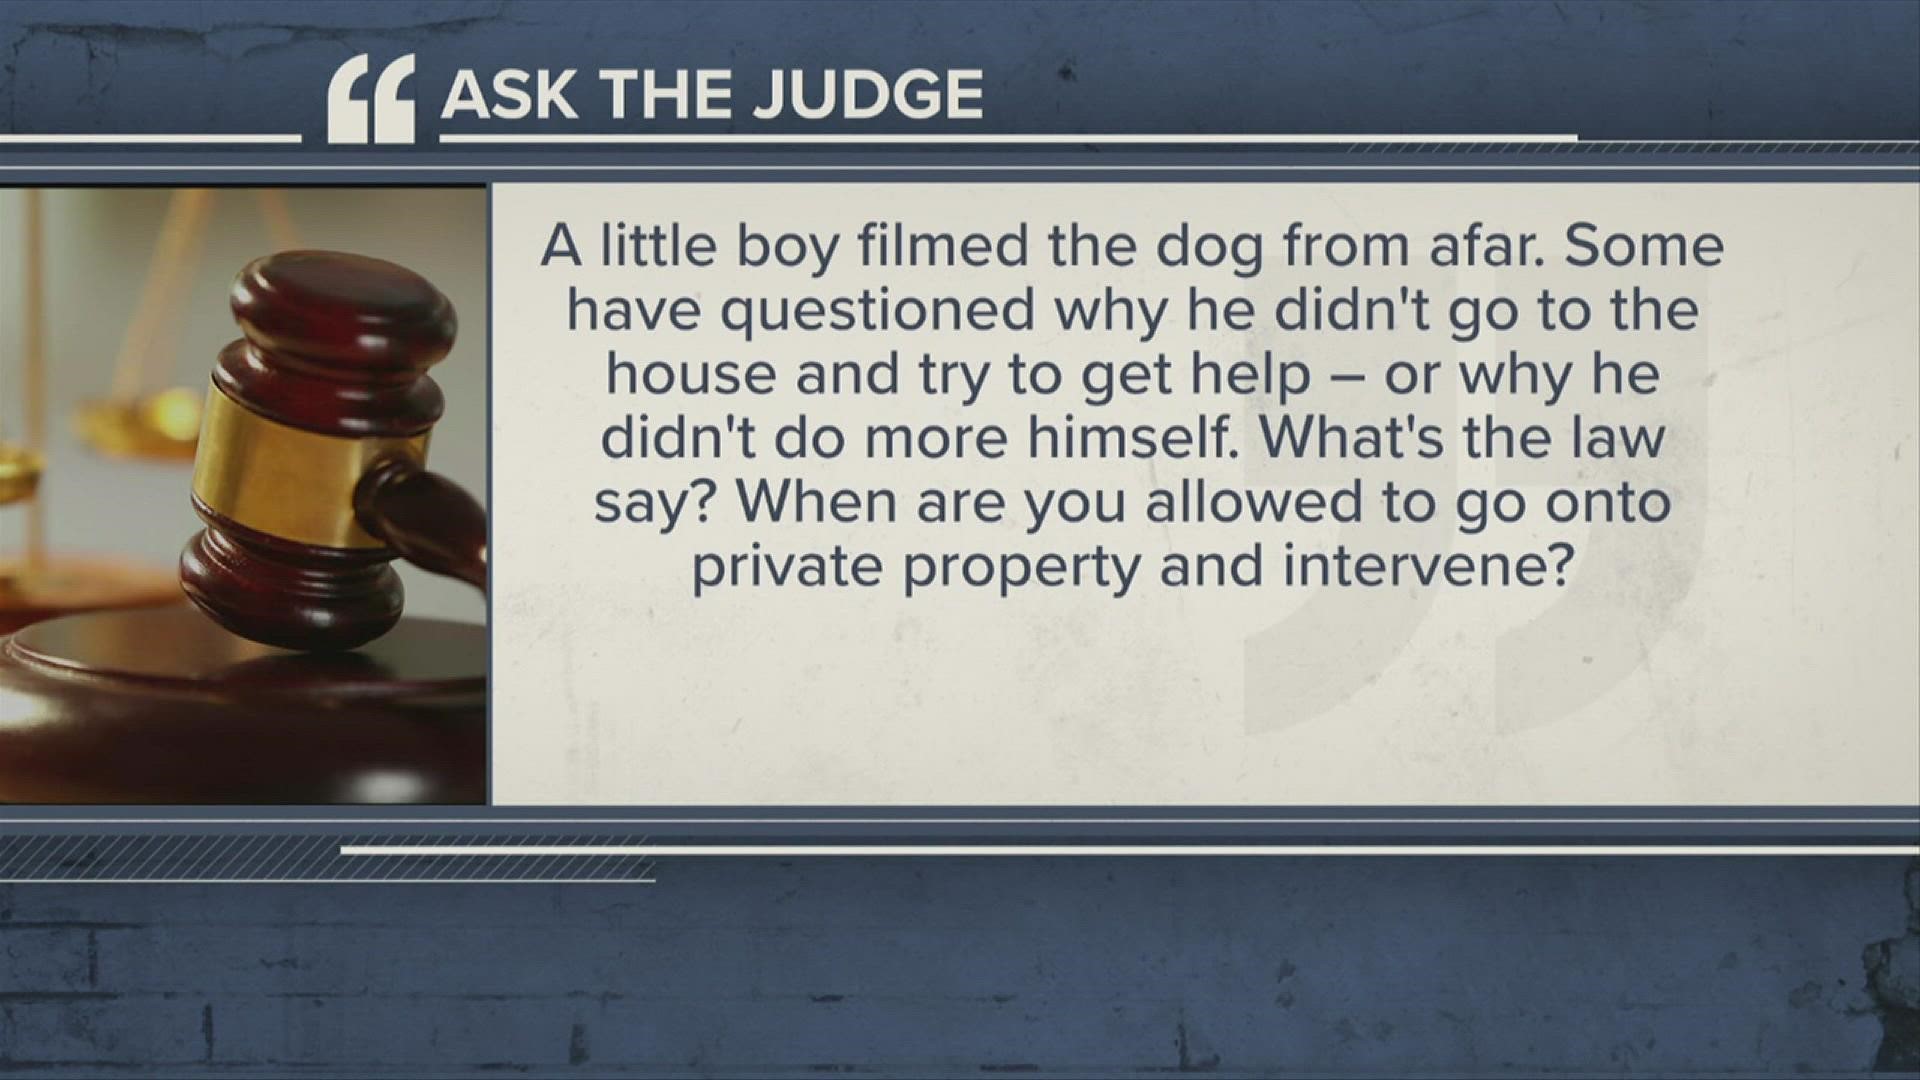 Submit your legal questions at 12NewsNow.com/askthejudge.